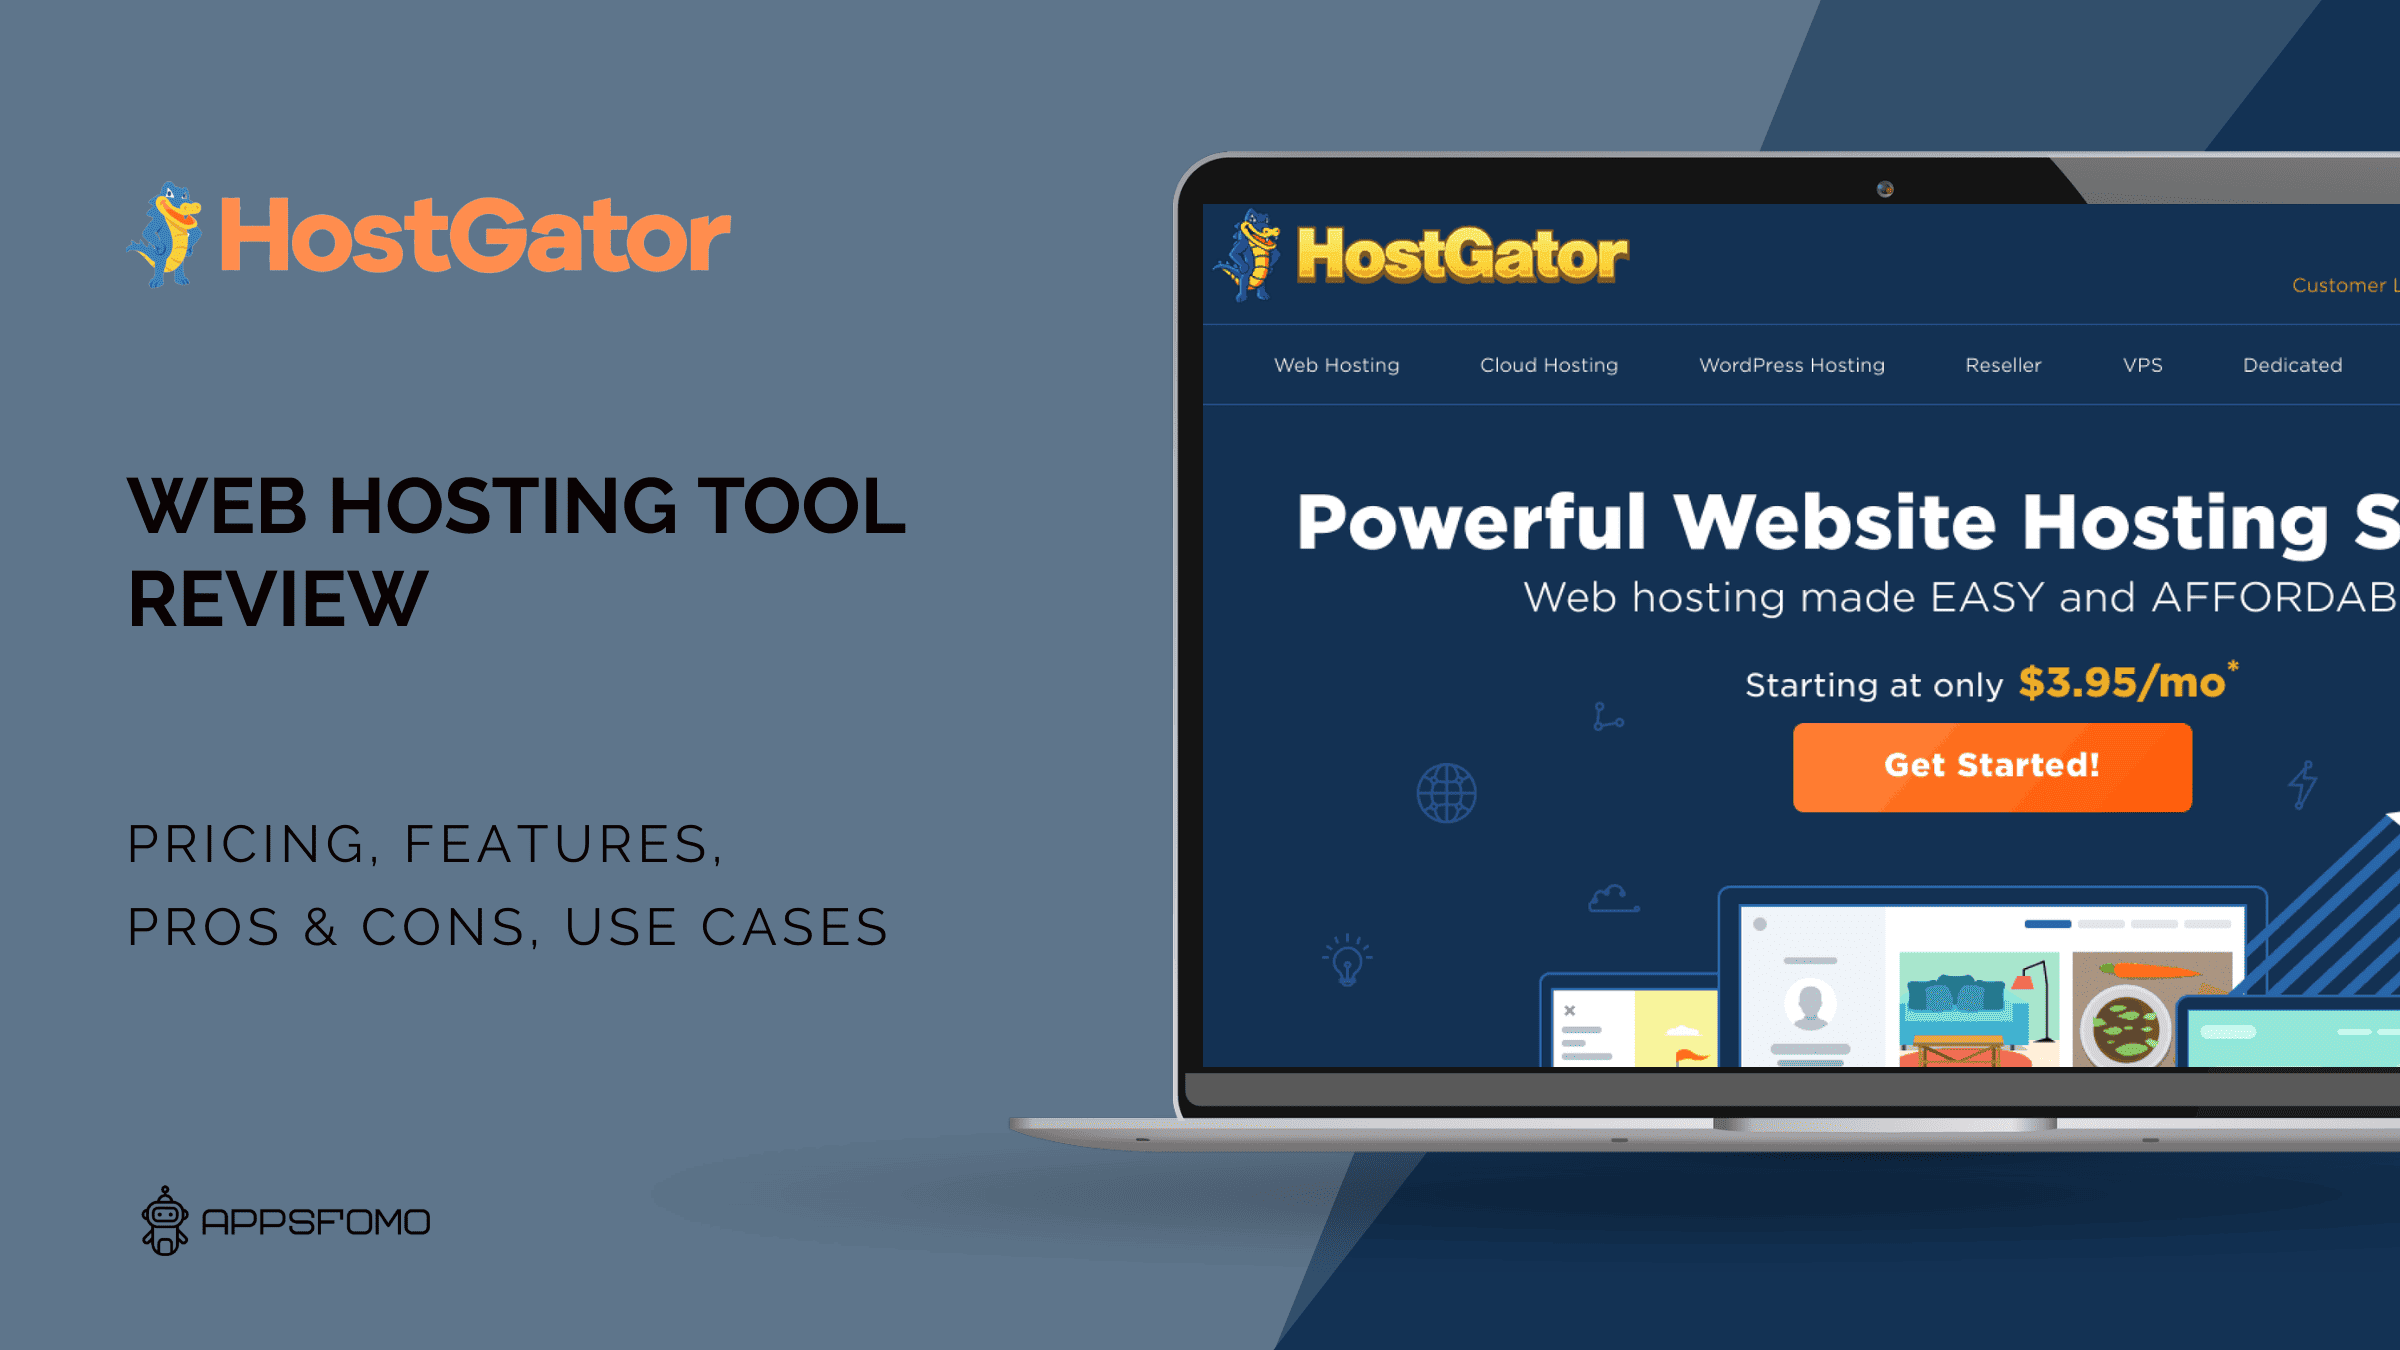 HostGator web hosting: The Reliable Web Hosting Solution with Flexible Plans